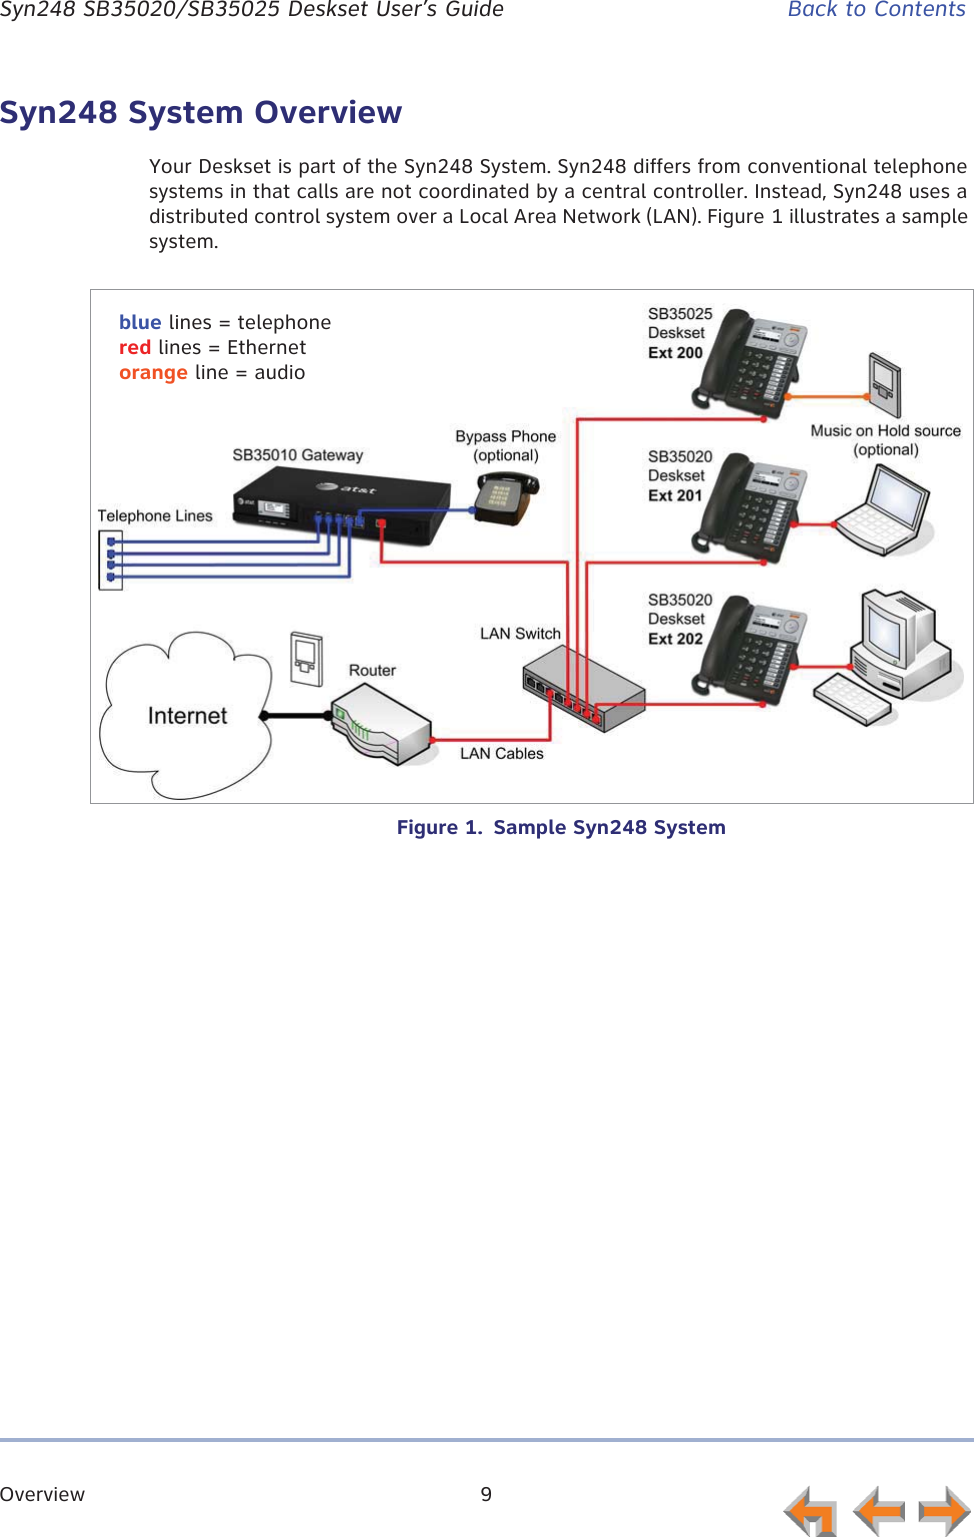 Overview 9      Syn248 SB35020/SB35025 Deskset User’s Guide Back to ContentsSyn248 System OverviewYour Deskset is part of the Syn248 System. Syn248 differs from conventional telephone systems in that calls are not coordinated by a central controller. Instead, Syn248 uses a distributed control system over a Local Area Network (LAN). Figure 1 illustrates a sample system.Figure 1.  Sample Syn248 Systemblue lines = telephone red lines = Ethernetorange line = audio